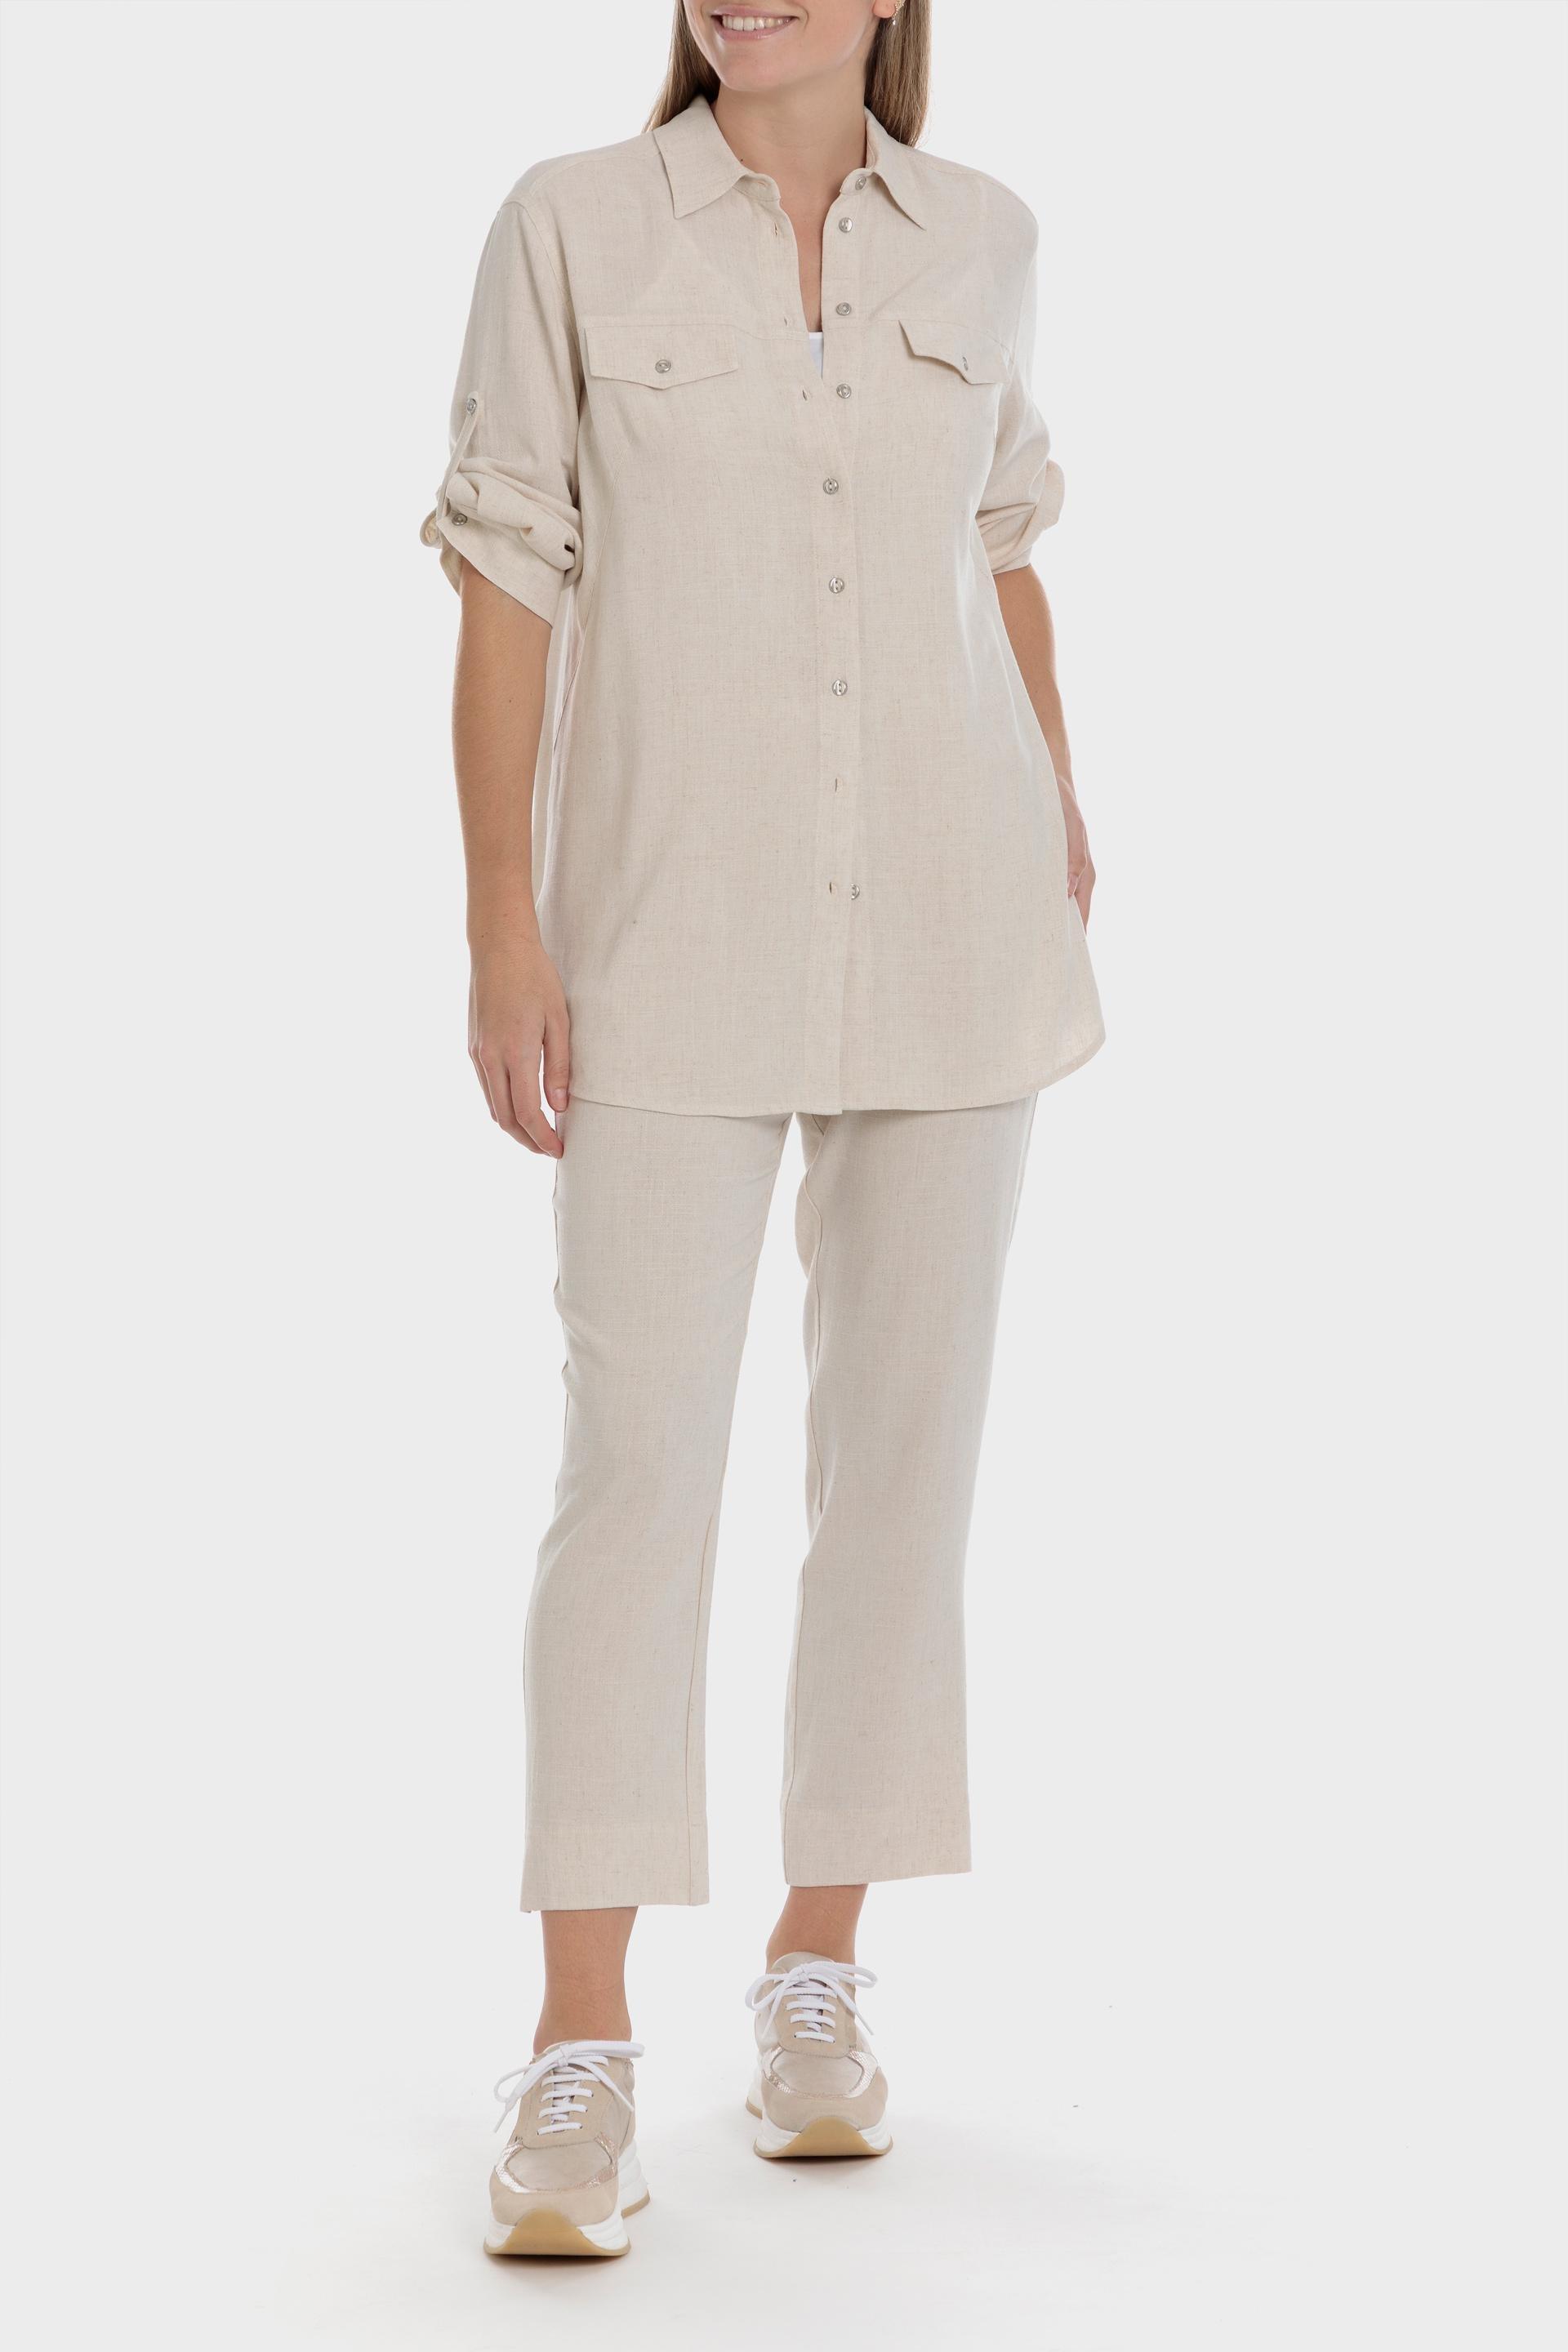 Punt Roma - Beige Roll-Up Sleeves Overshirt